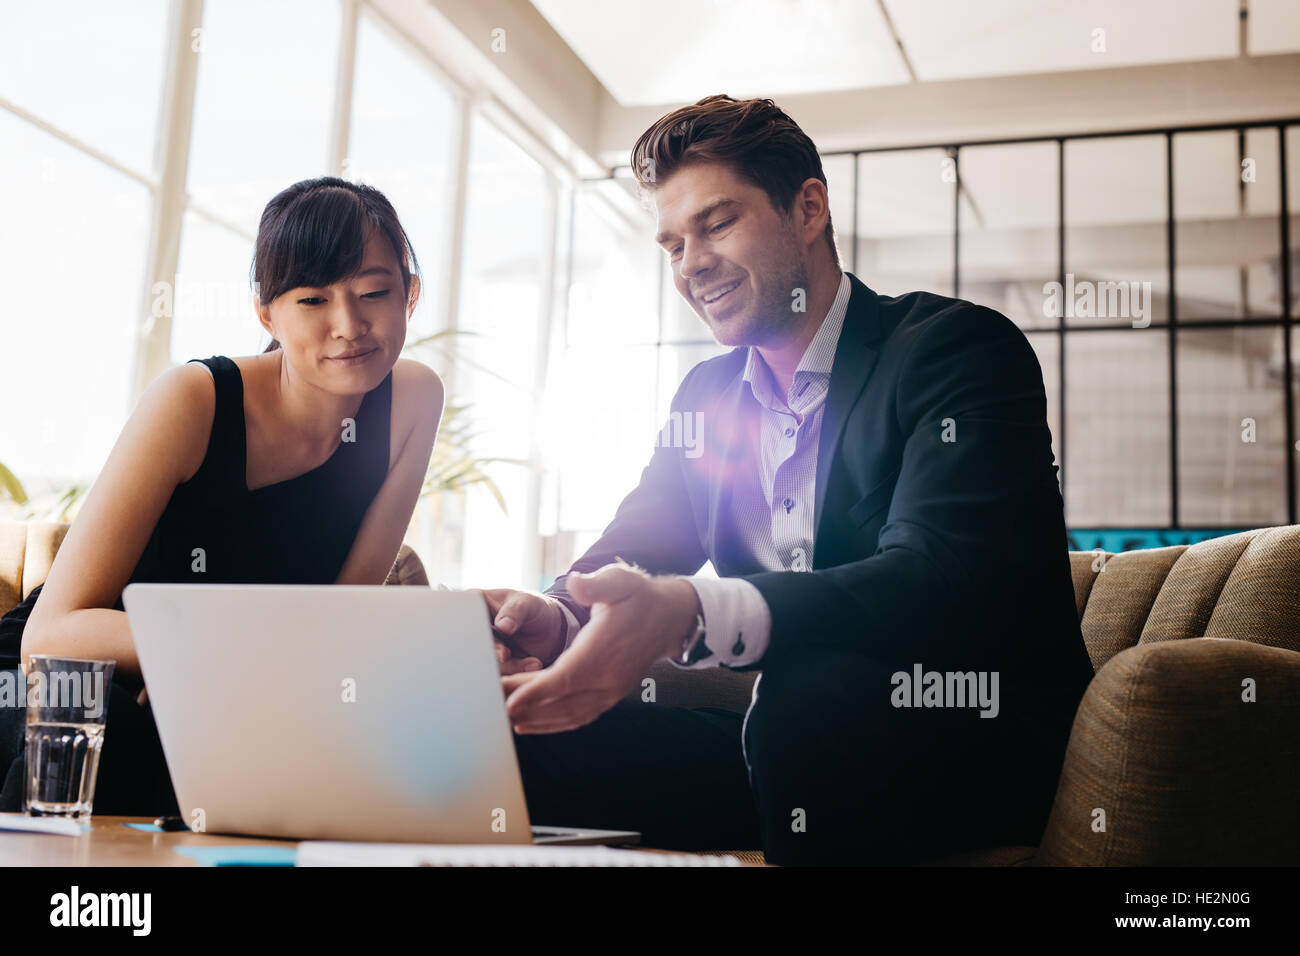 Shot of two young businesspeople using laptop in lobby of modern office. Man and woman sitting on foyer working together on laptop. Stock Photo